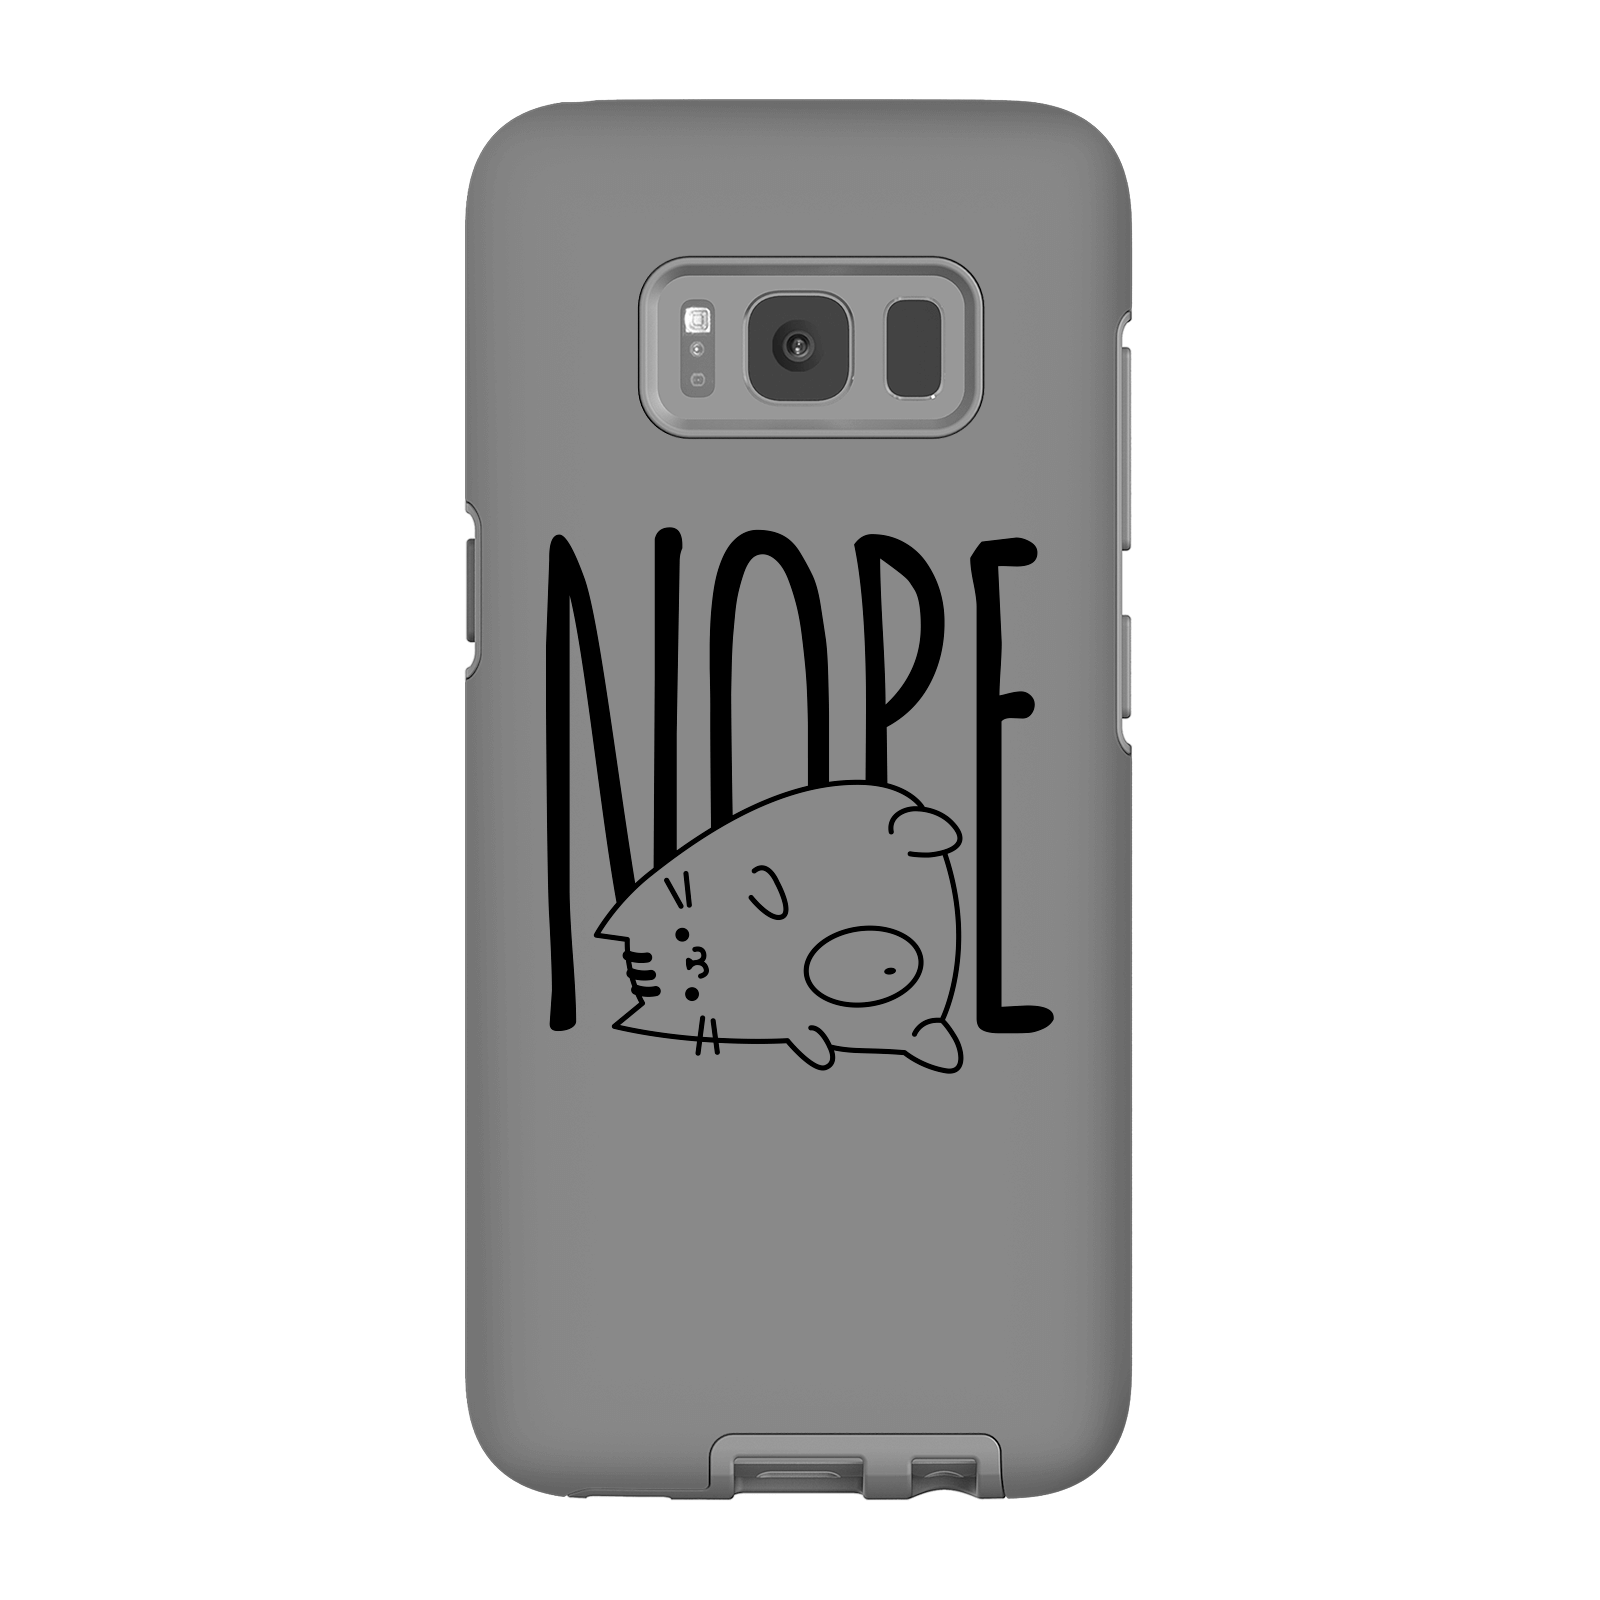 Nope Phone Case for iPhone and Android - Samsung S8 - Tough Case - Matte